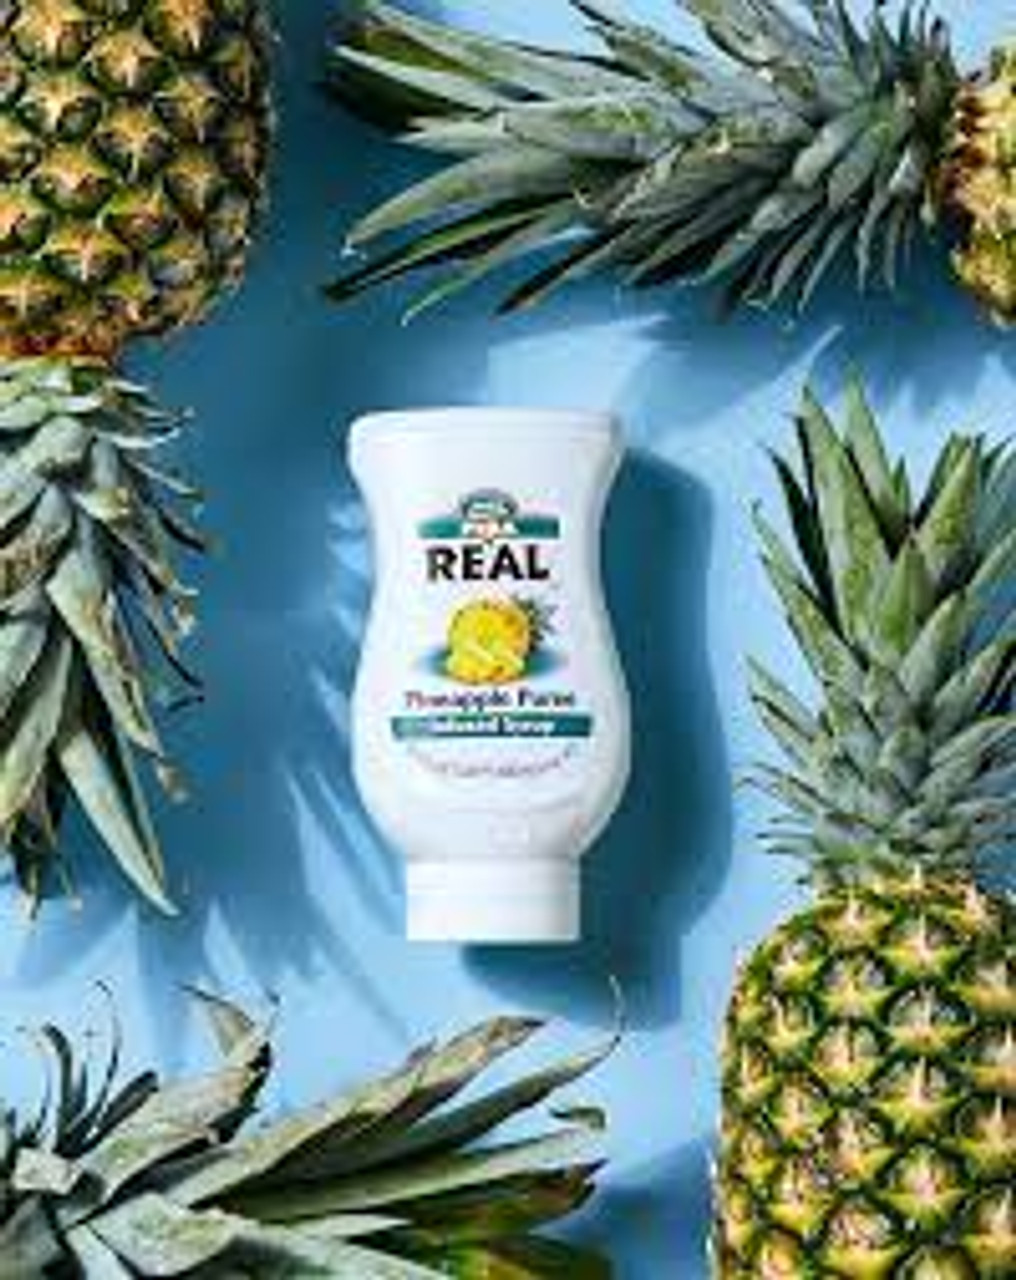 Real 16.9 fl. oz. Pineapple Puree Infused Syrup - Refreshing Tropical Flavor - Chicken Pieces